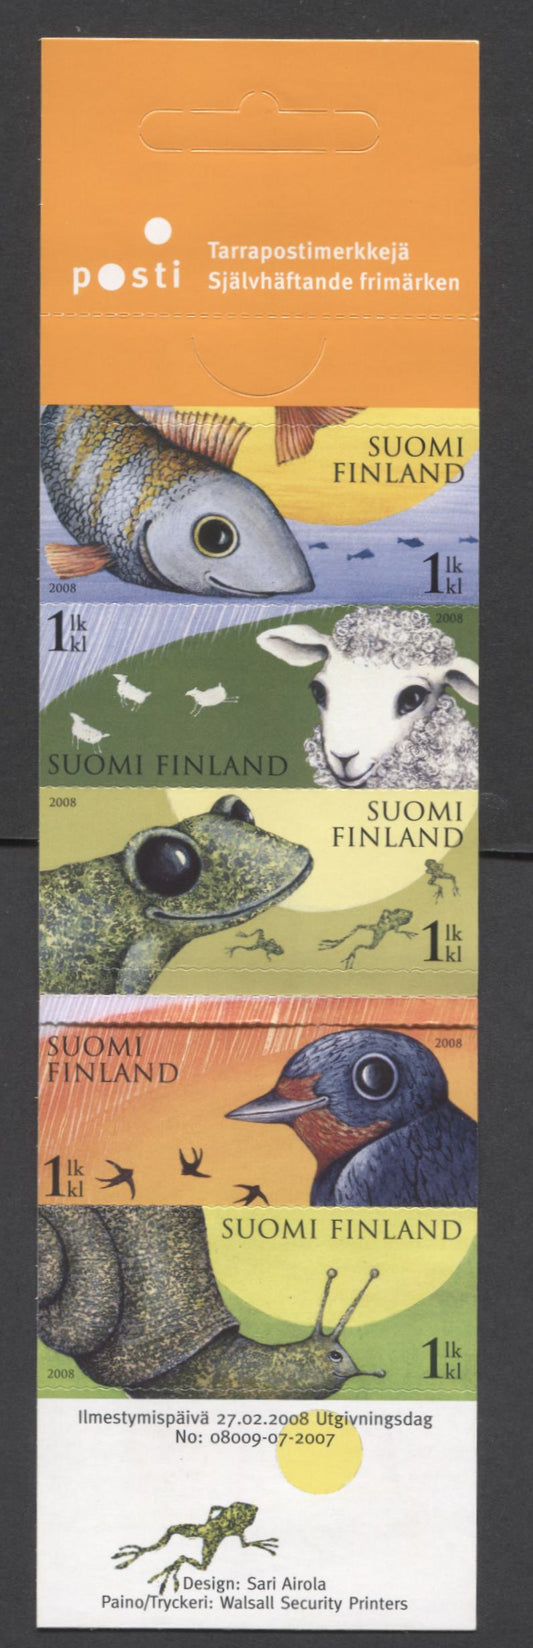 Lot 221 Finland SC#1310 1lf Multicolored 2008 Fauna Associated With Weather Forecasting & Folk Beliefs Issue, A VFNH Booklet Of 5, Click on Listing to See ALL Pictures, 2017 Scott Cat. $12.5